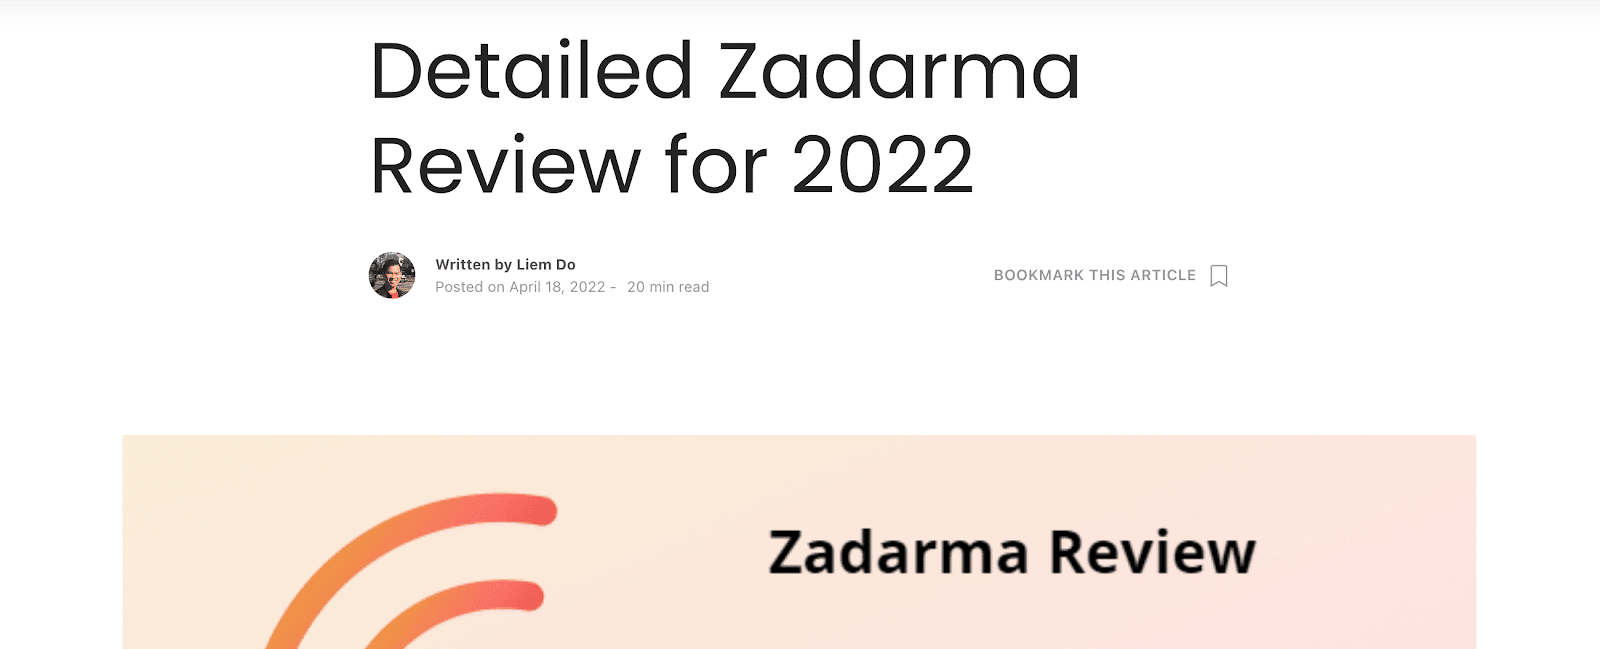 Quoleady's client blog topic: Detailed Zadarma review for 2022